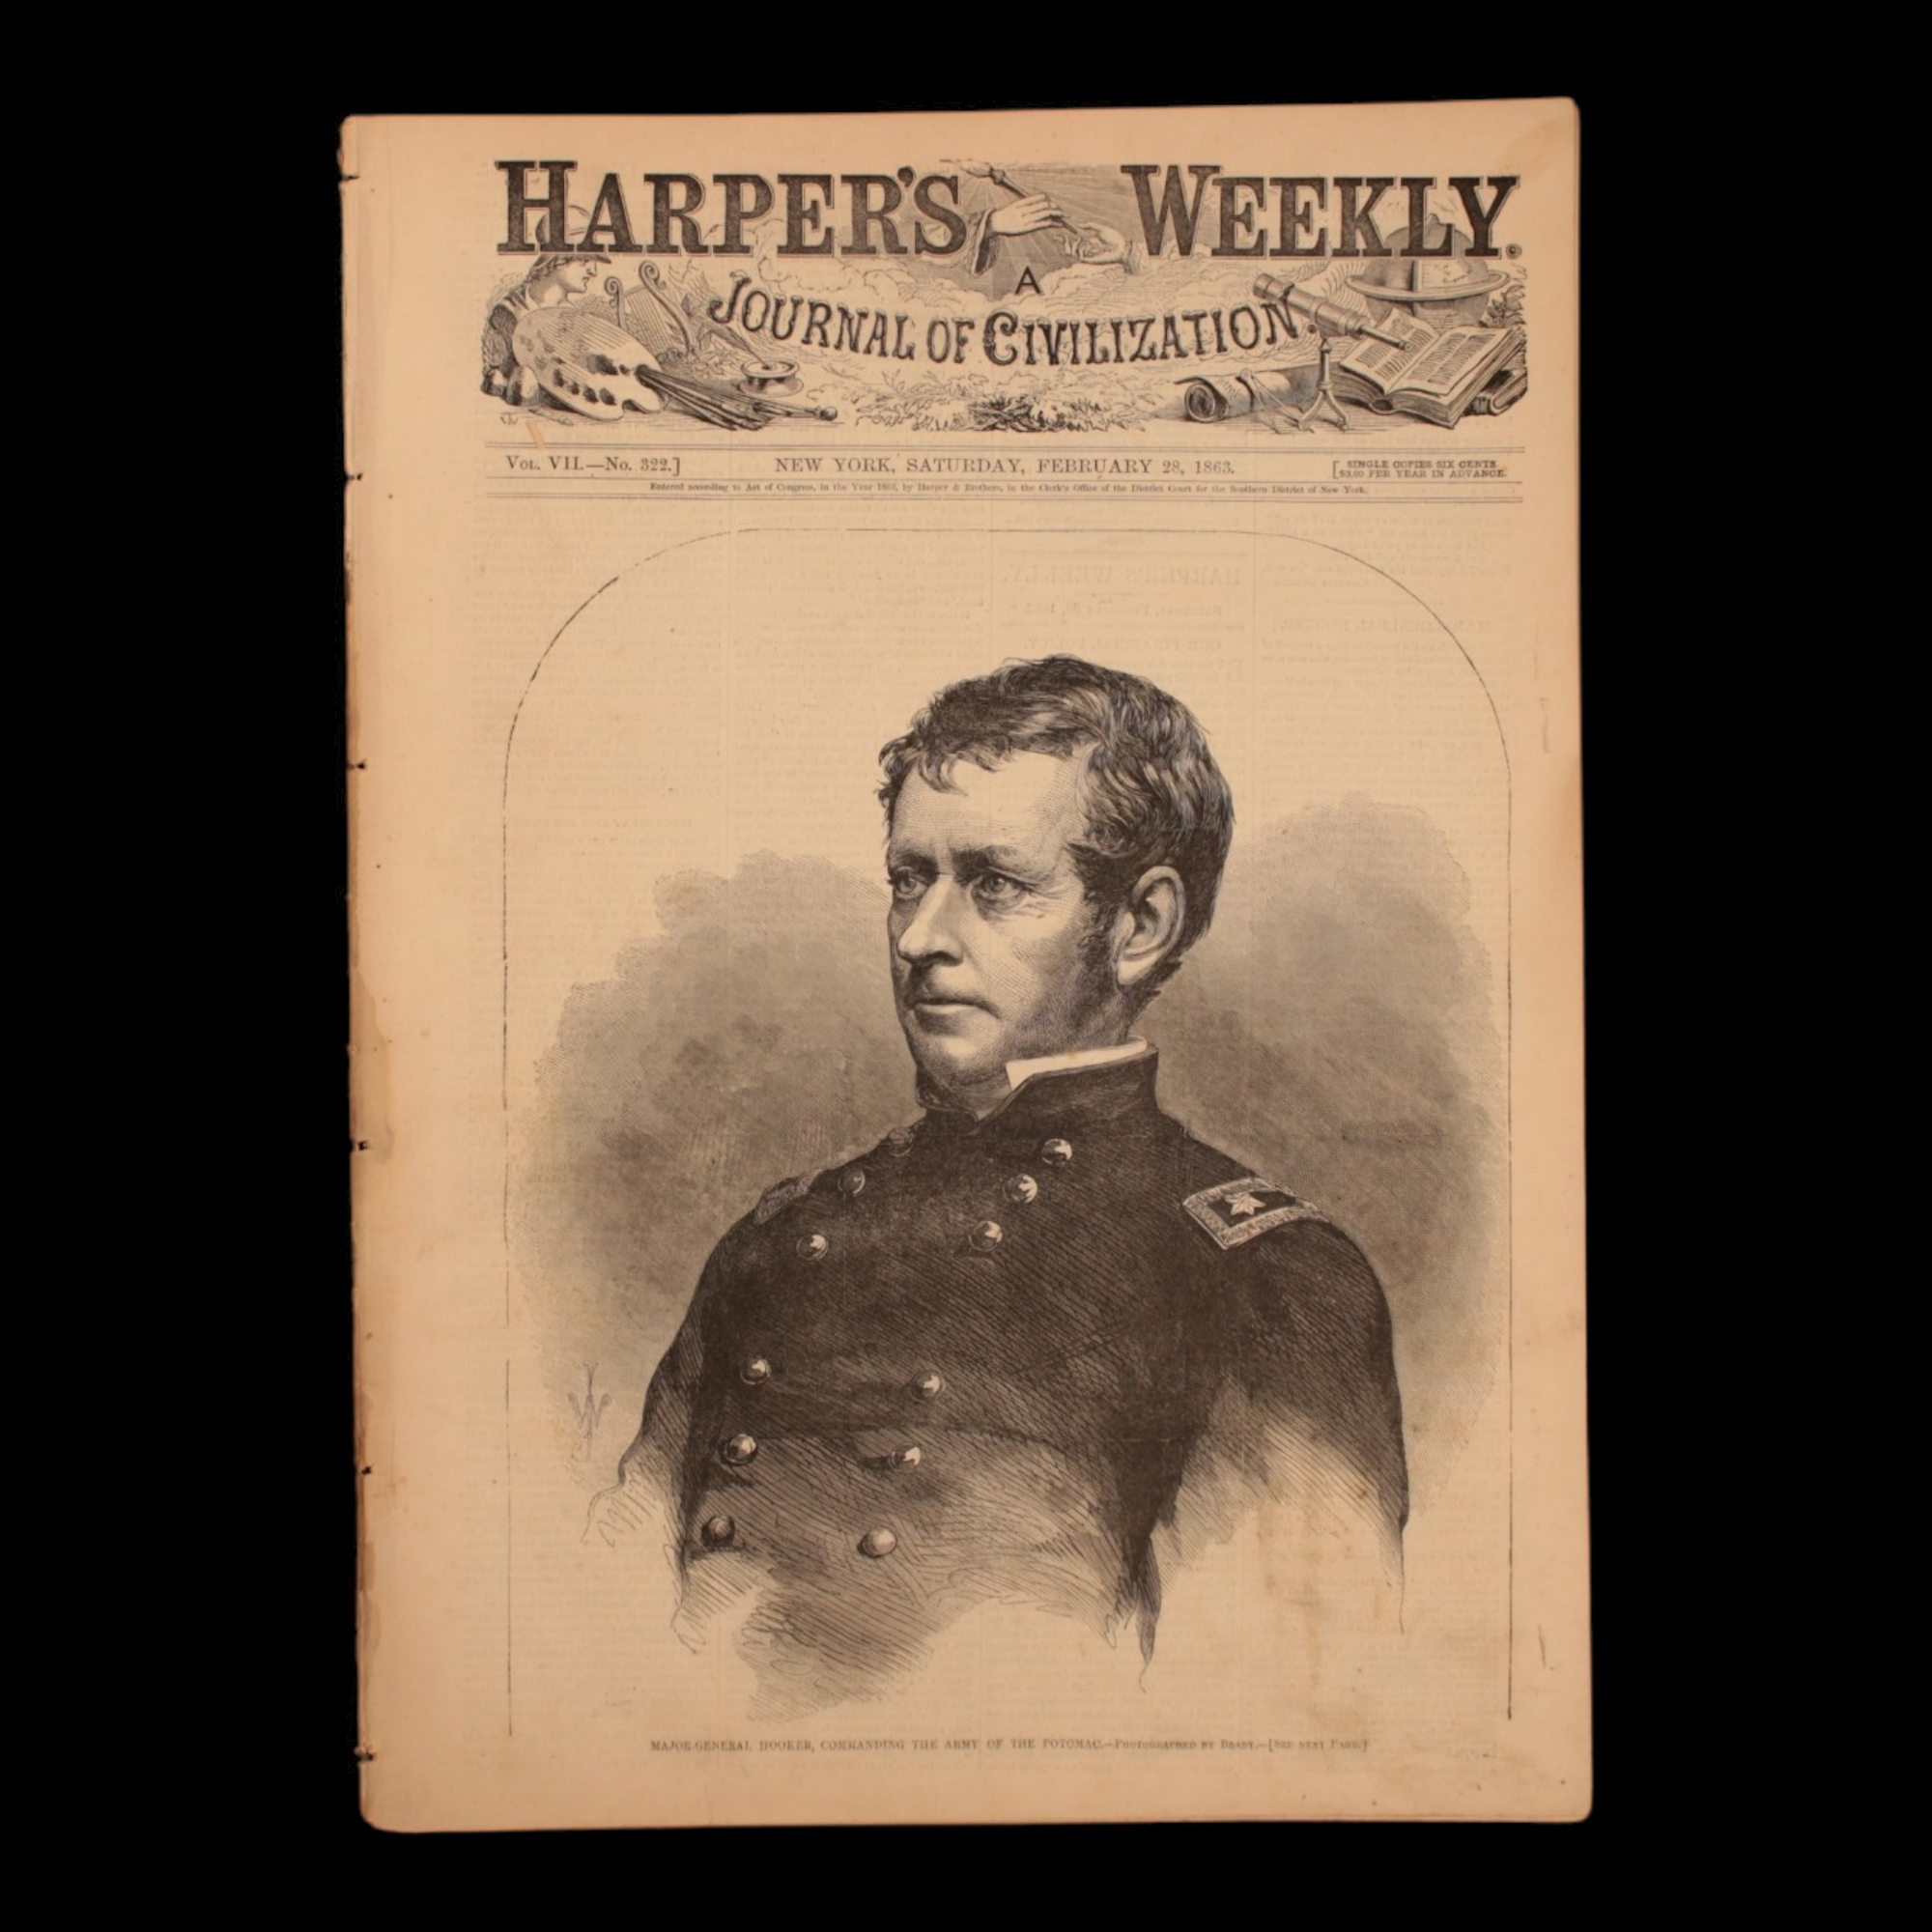 Harper's Weekly — Maj. Gen. Booker, "Our Colored Troops," Map of Slavery, Large "Pay Day" Centerfold